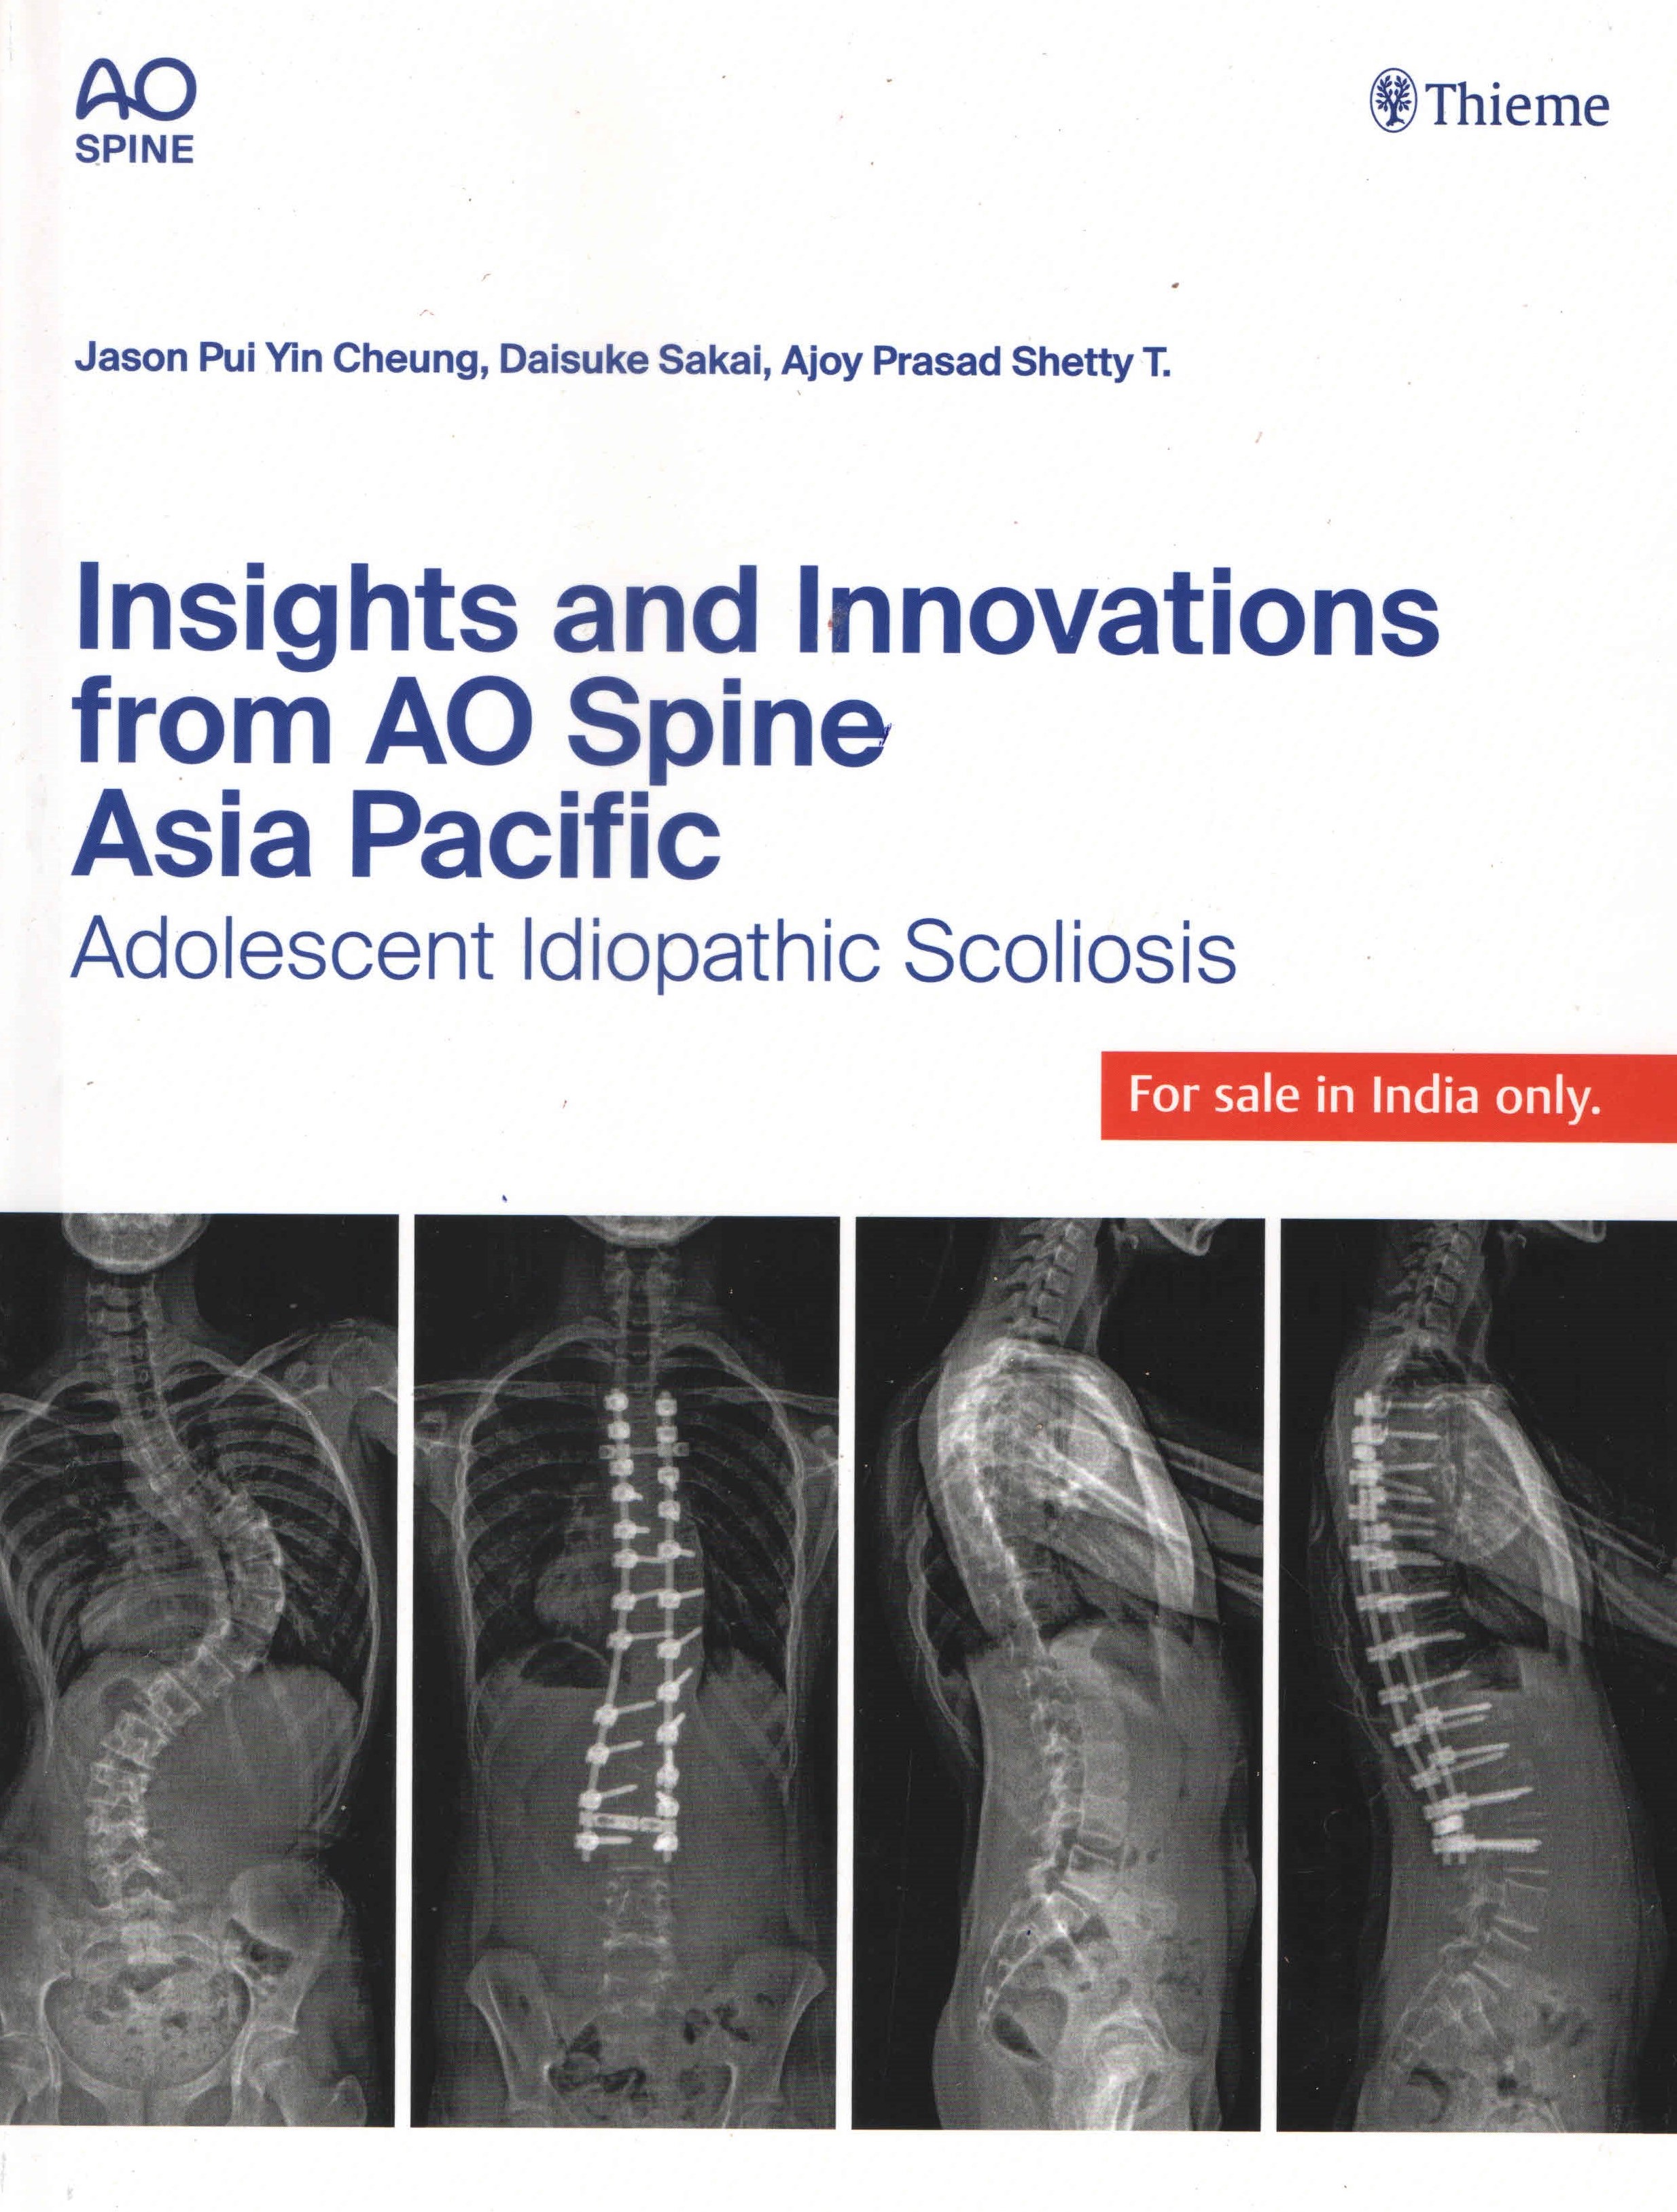 

exclusive-publishers/thieme-medical-publishers/insights-and-innovations-from-ao-spine-asia-pacific:-adolescent-idiopathic-scoliosis-9789395390620